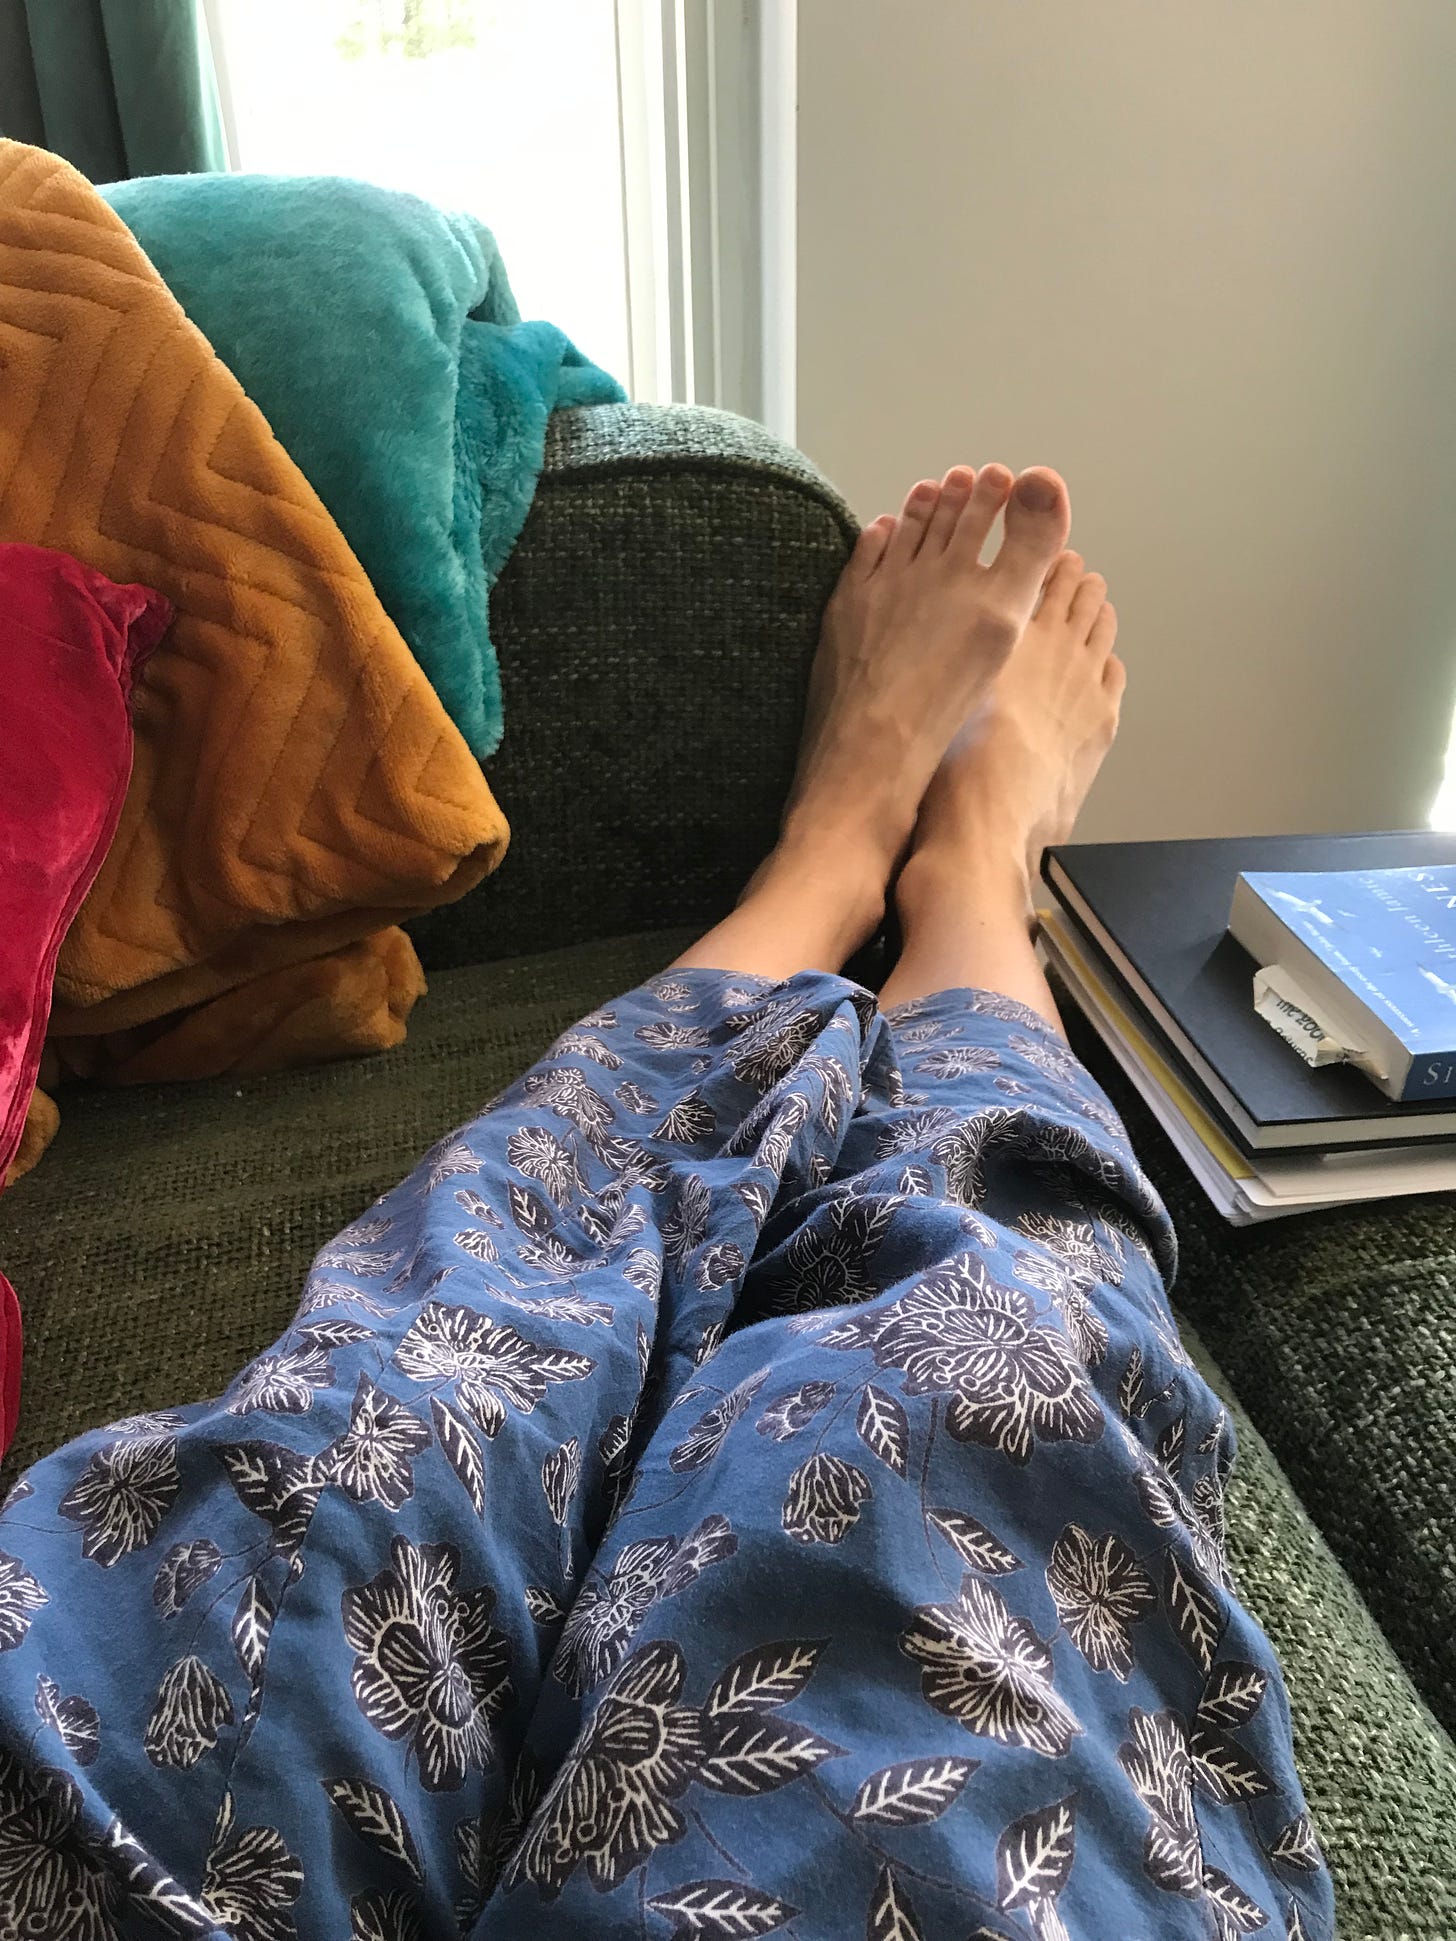 view of my legs in blue pyjamas and bare feet on a sofa with turquoise and mustard velvet blankets folded up and books to the side.